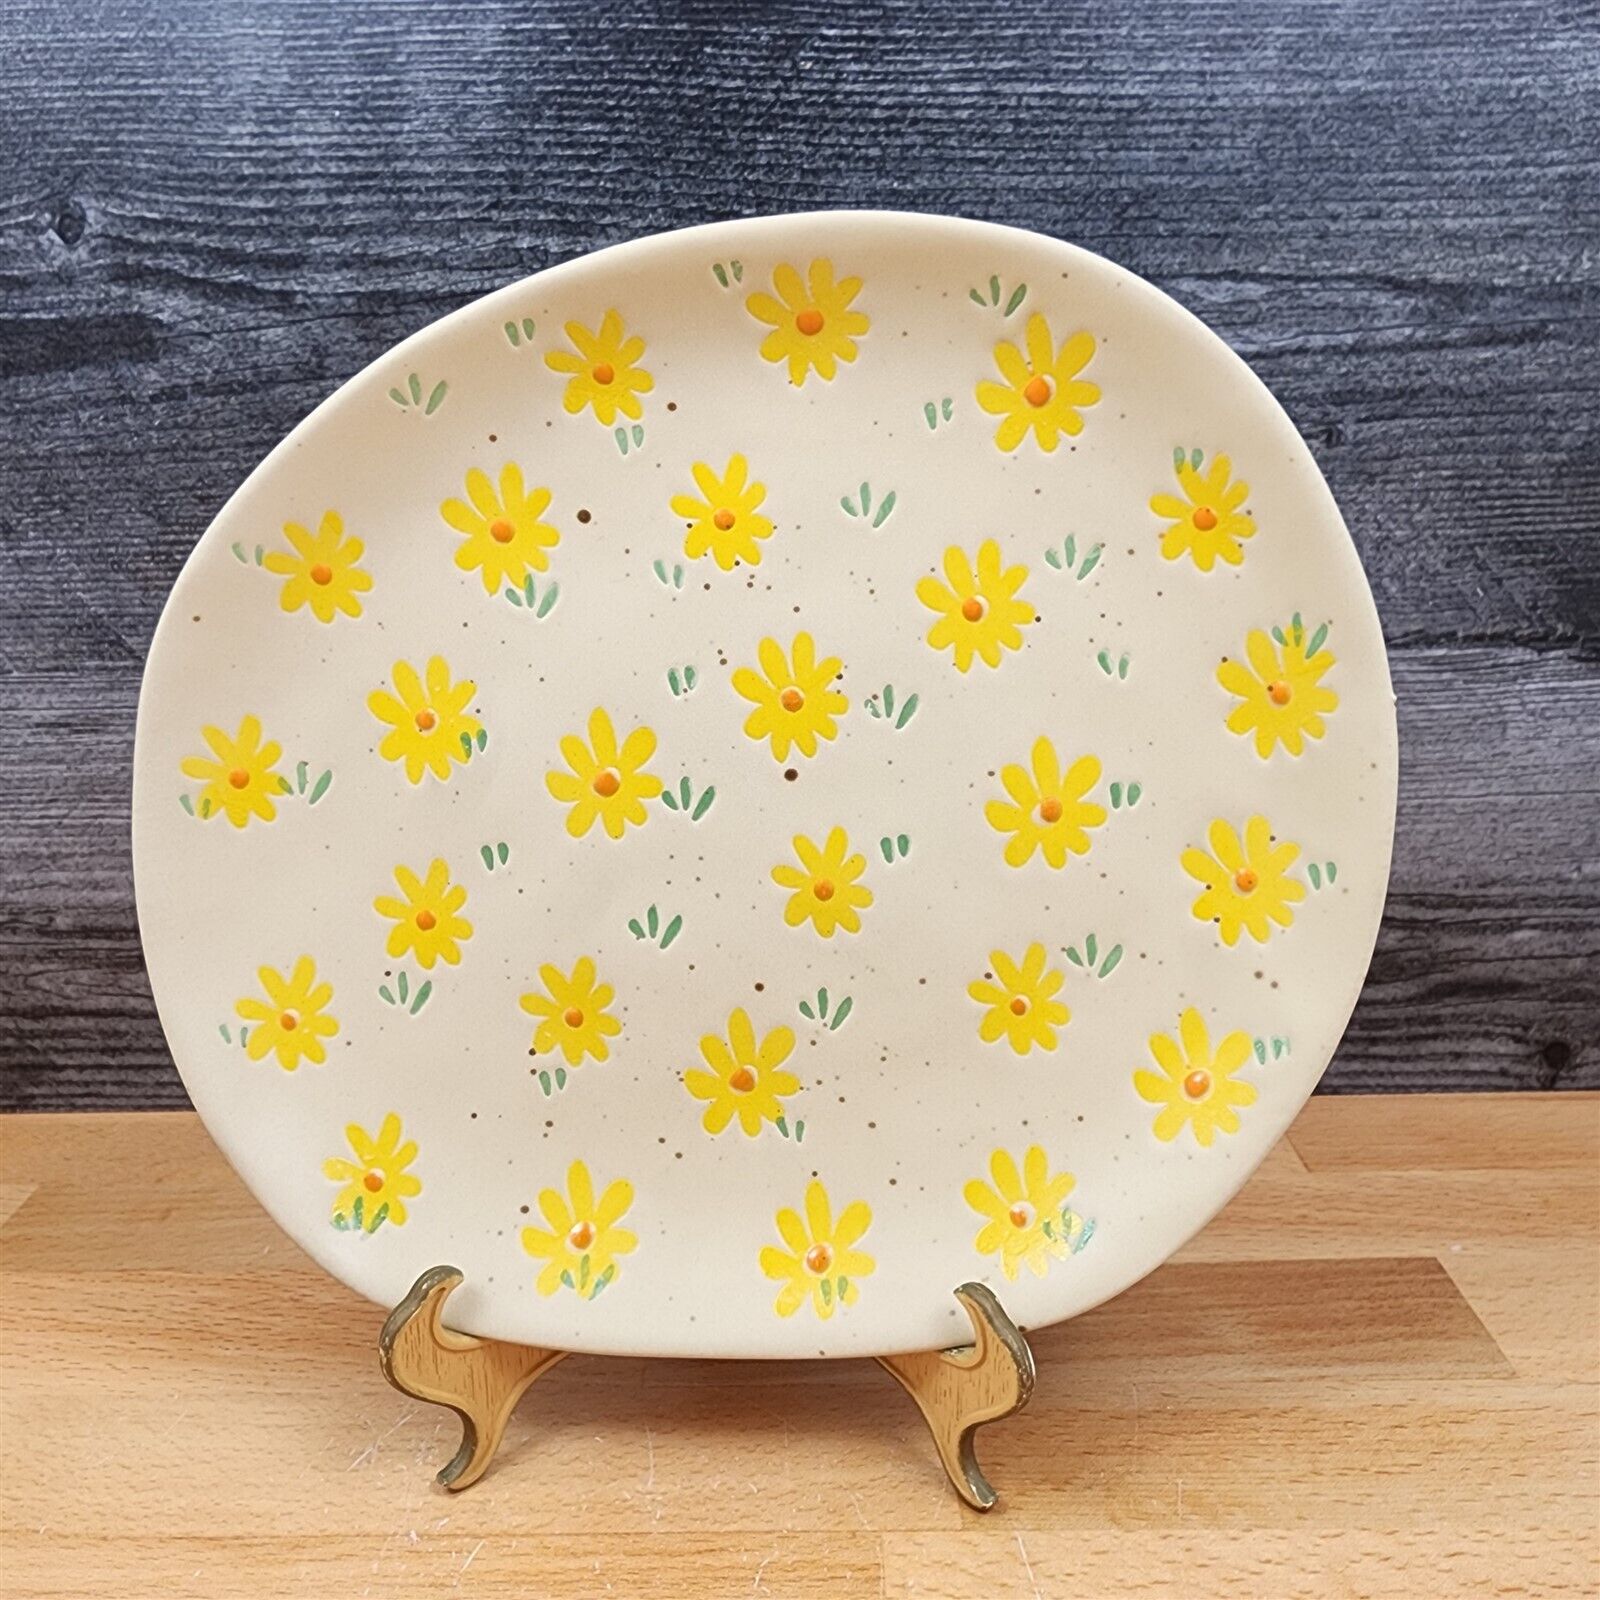 Spring Daisy Floral Salad Plate Embossed Decorative by Blue Sky